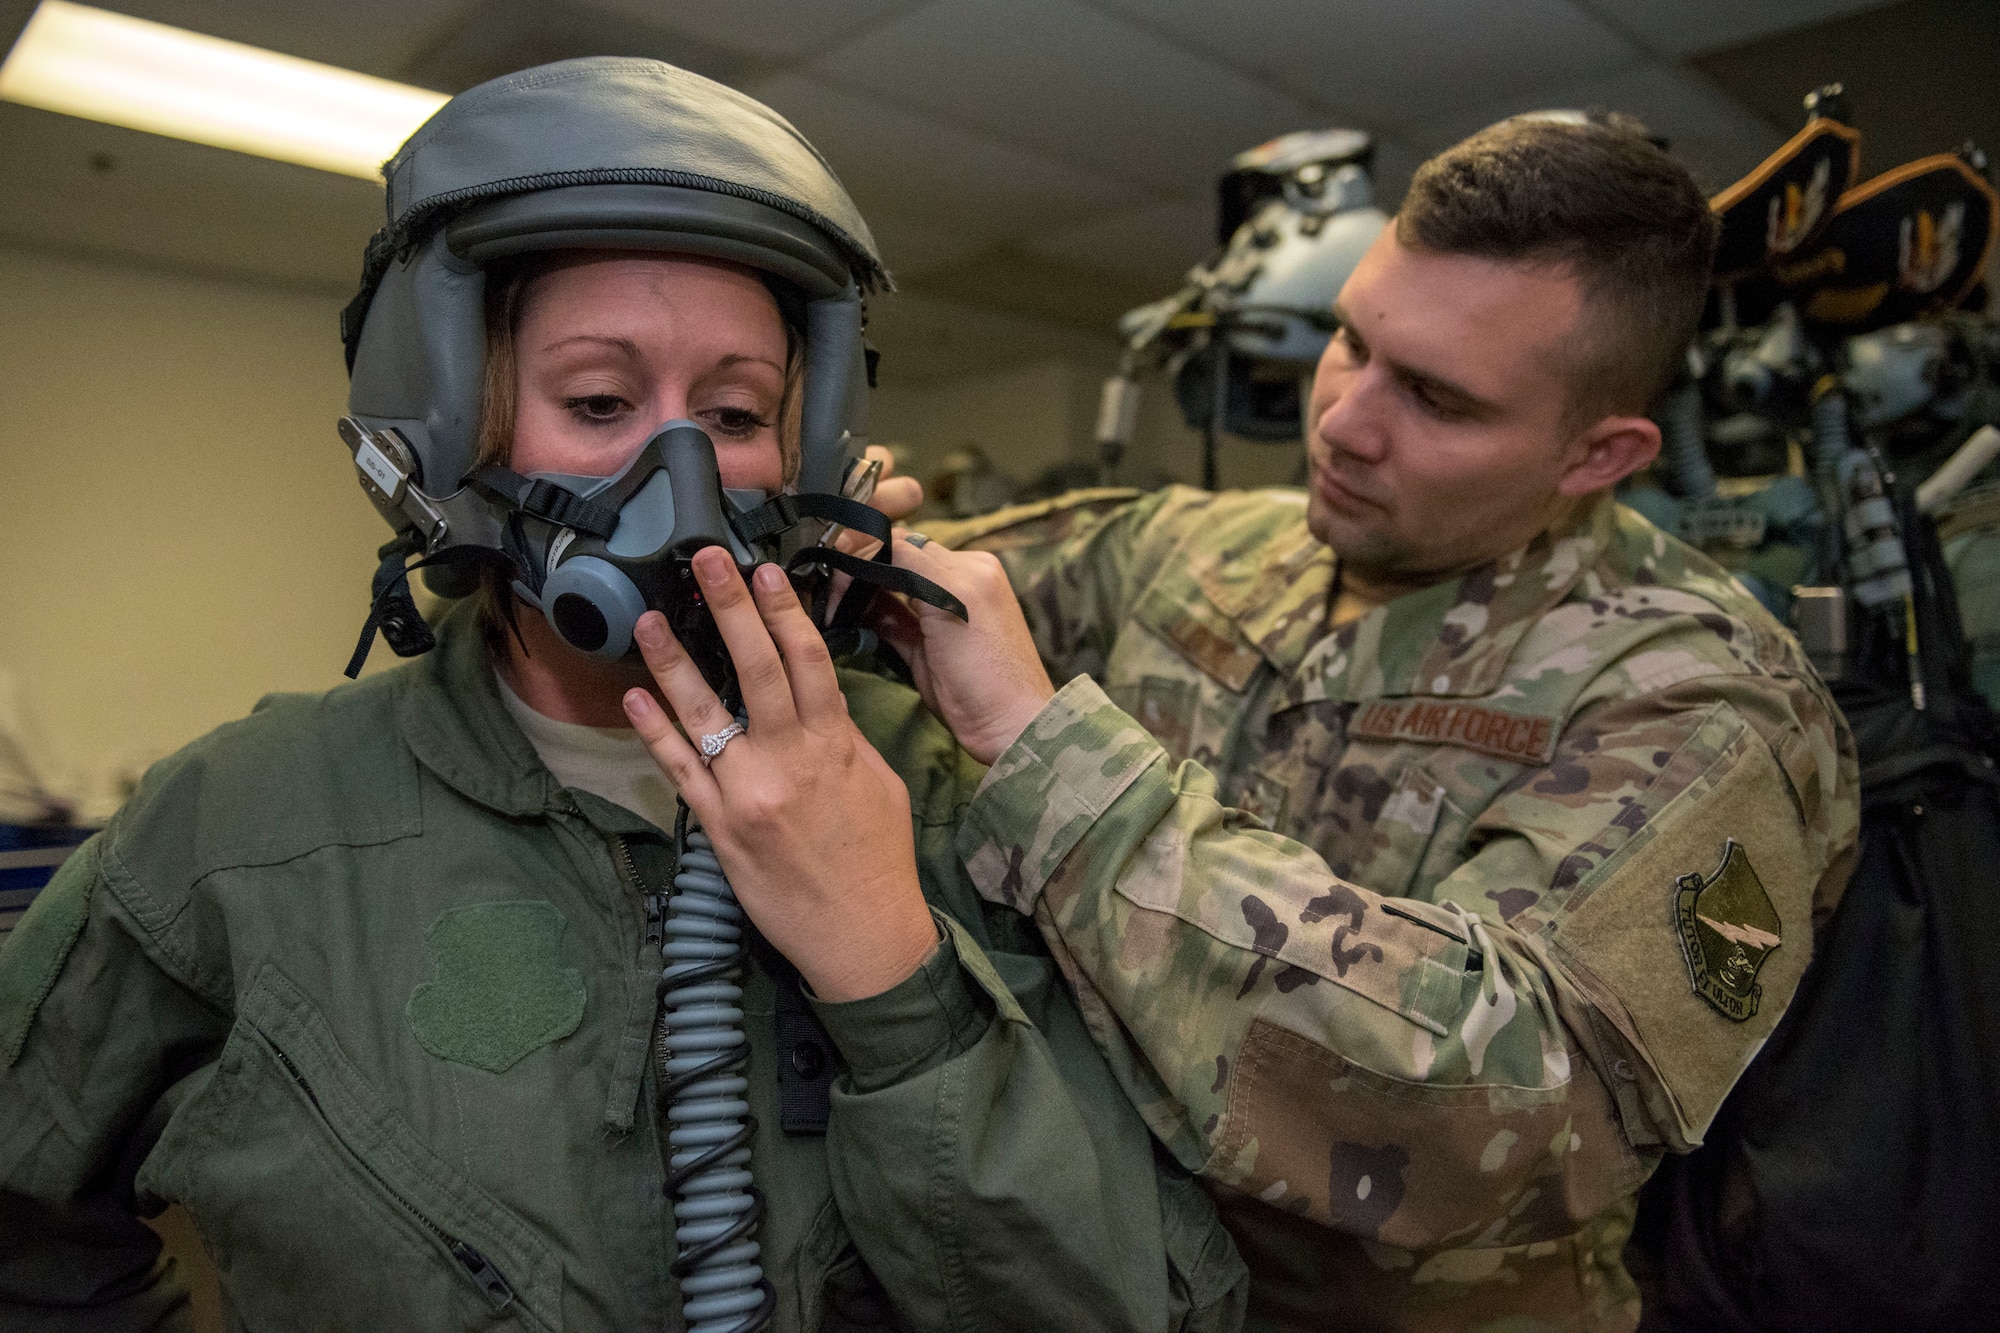 Staff Sgt. Daniel Locke, 314th Fighter Squadron Aircrew Flight Equipment technician, fits a helment to Staff Sgt. Saydee Osborn, 49th Equipment Maintenance Squadron Non-Destructive Inspection technician June 4, 2019, on Marine Corps Air Station Miramar, Calif. Airmen from the 314th FS and 314th Aircraft Maintenance Unit had the opportunity to take a familiarization flight in a 314th FS F-16 Viper to experience dissimiliar combat air training alongside F/A-18 Hornets from the Marine Fighter Attack Squadron 314. (U.S. Air Force photo by Staff Sgt. Christine Groening)